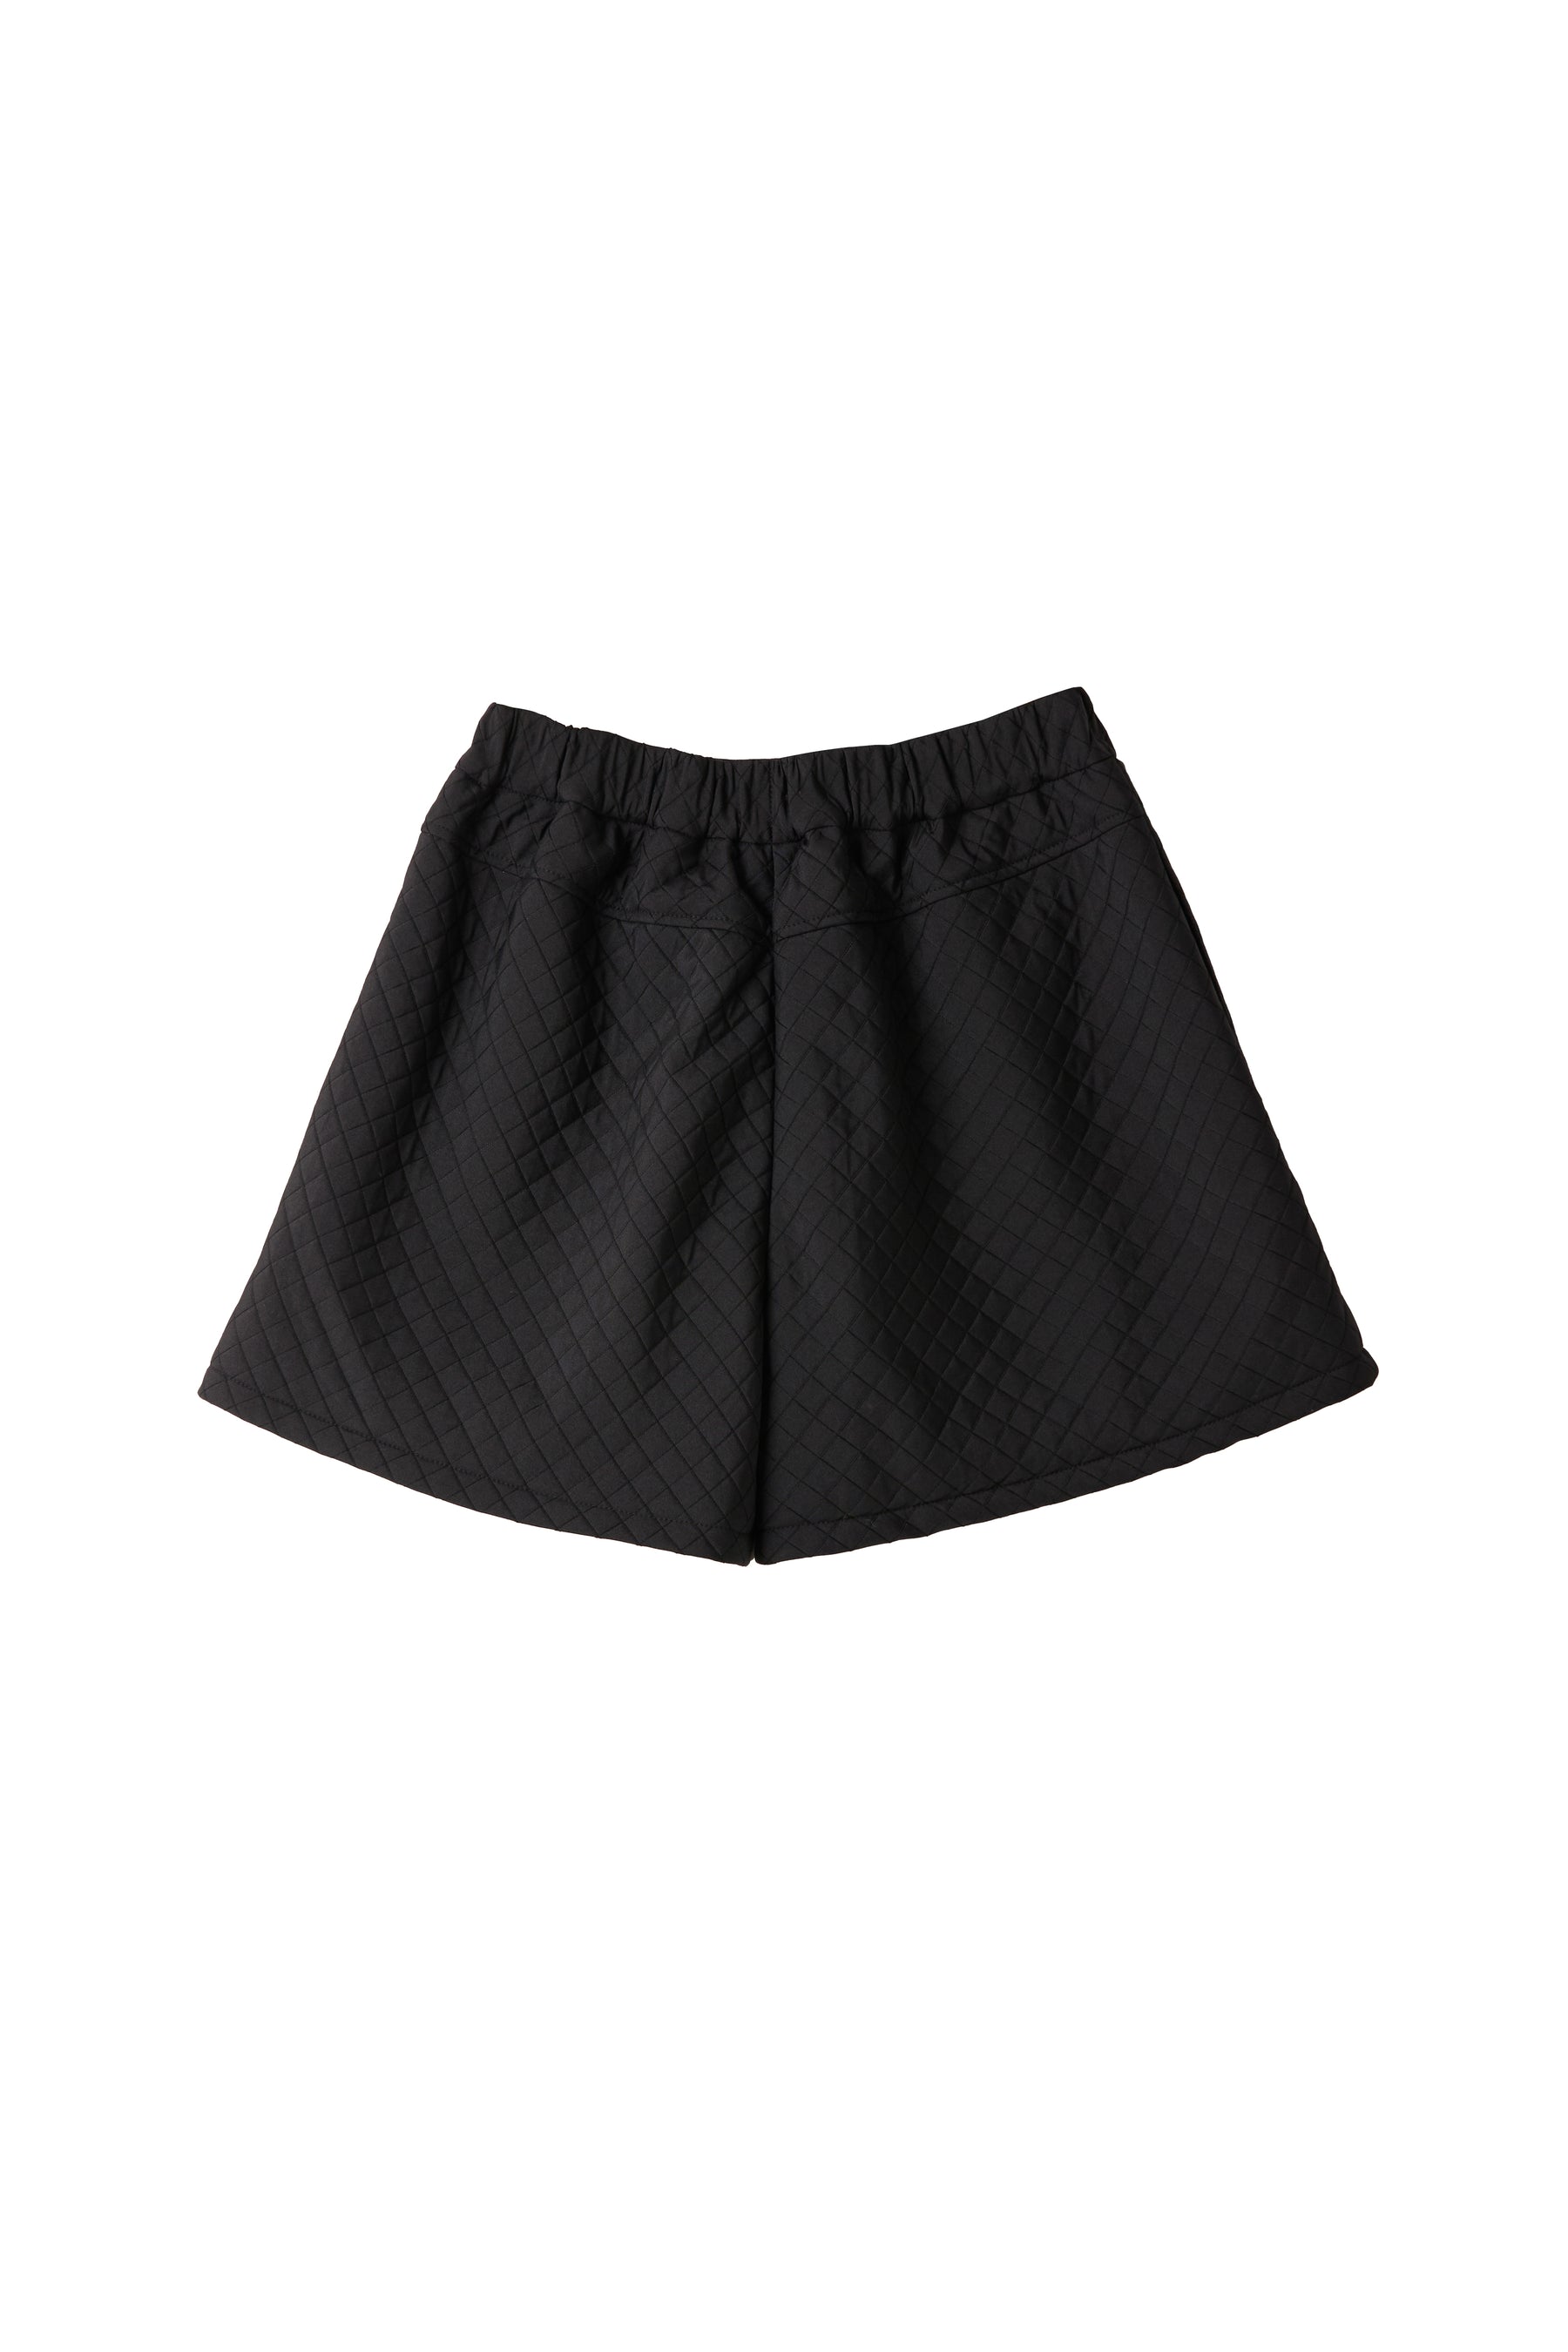 Her lip to / Quilted Flare Bell Shortsショーパン - ショートパンツ